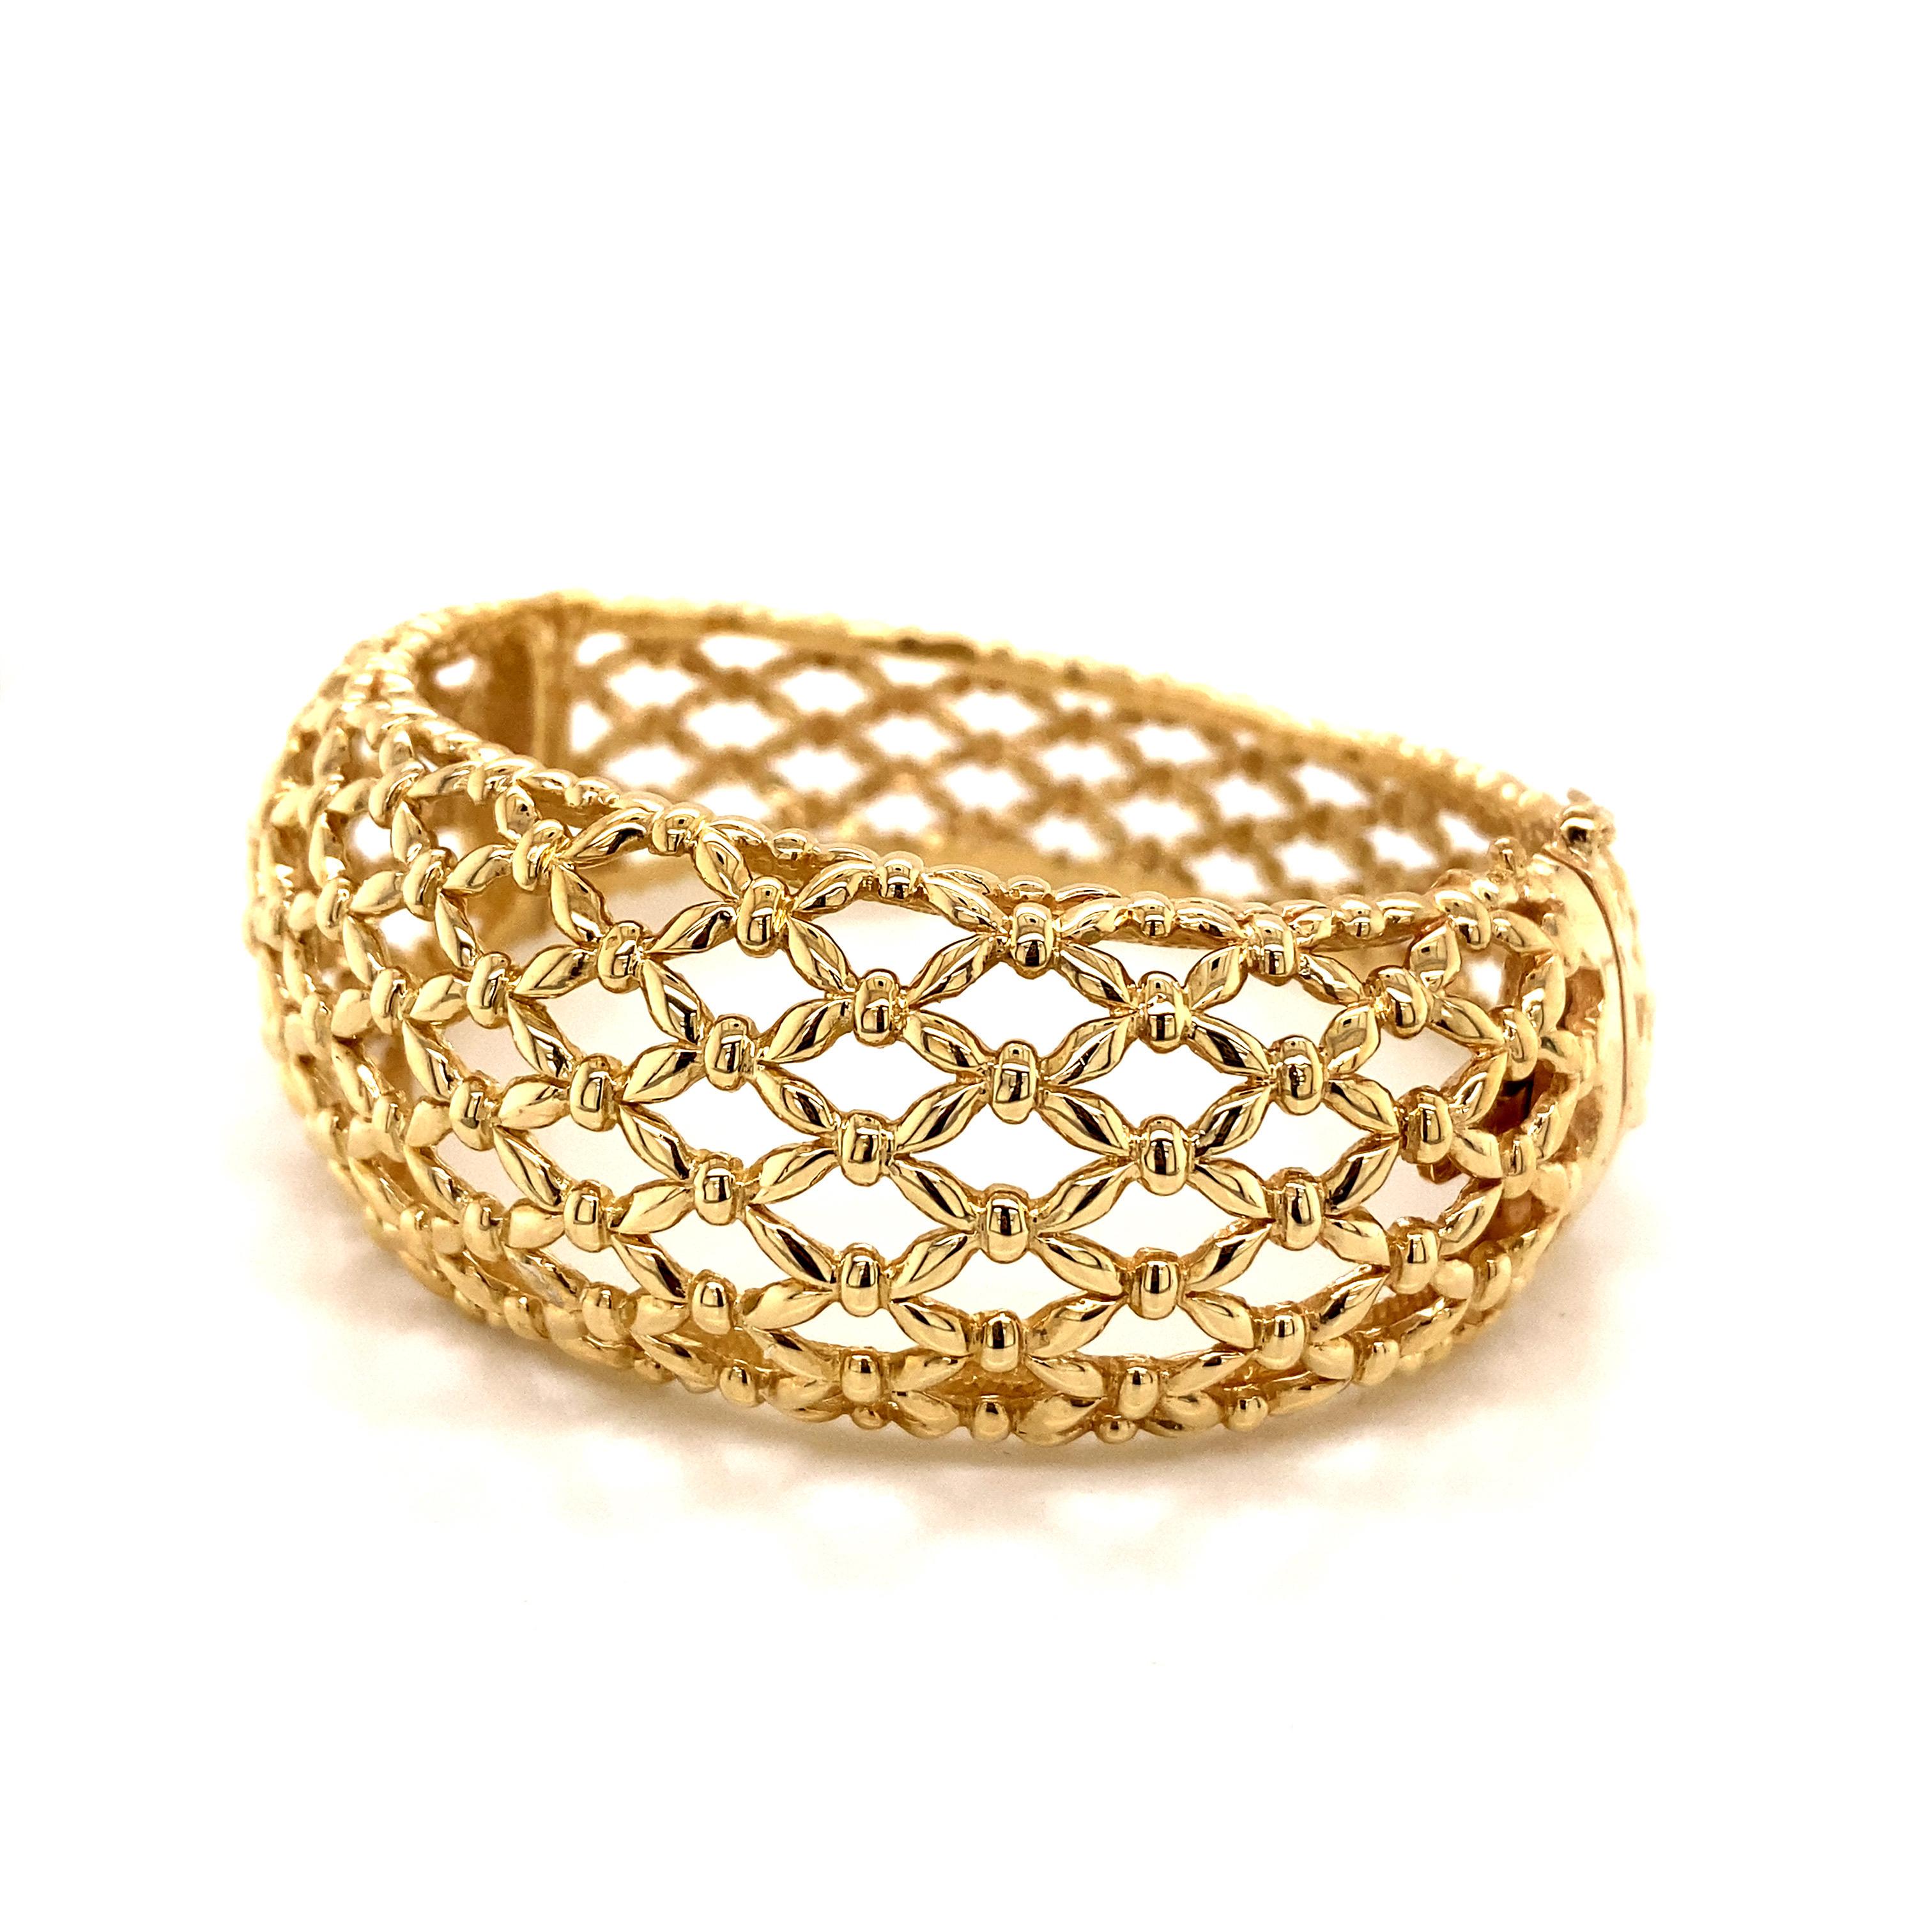 A true masterpiece of 1990s craftsmanship, this showstopping bangle bracelet showcases the artistry of intricate basket weave metalwork. Rendered in lush 14k yellow gold, the bracelet features a unique tapering design that creates a sculptural,